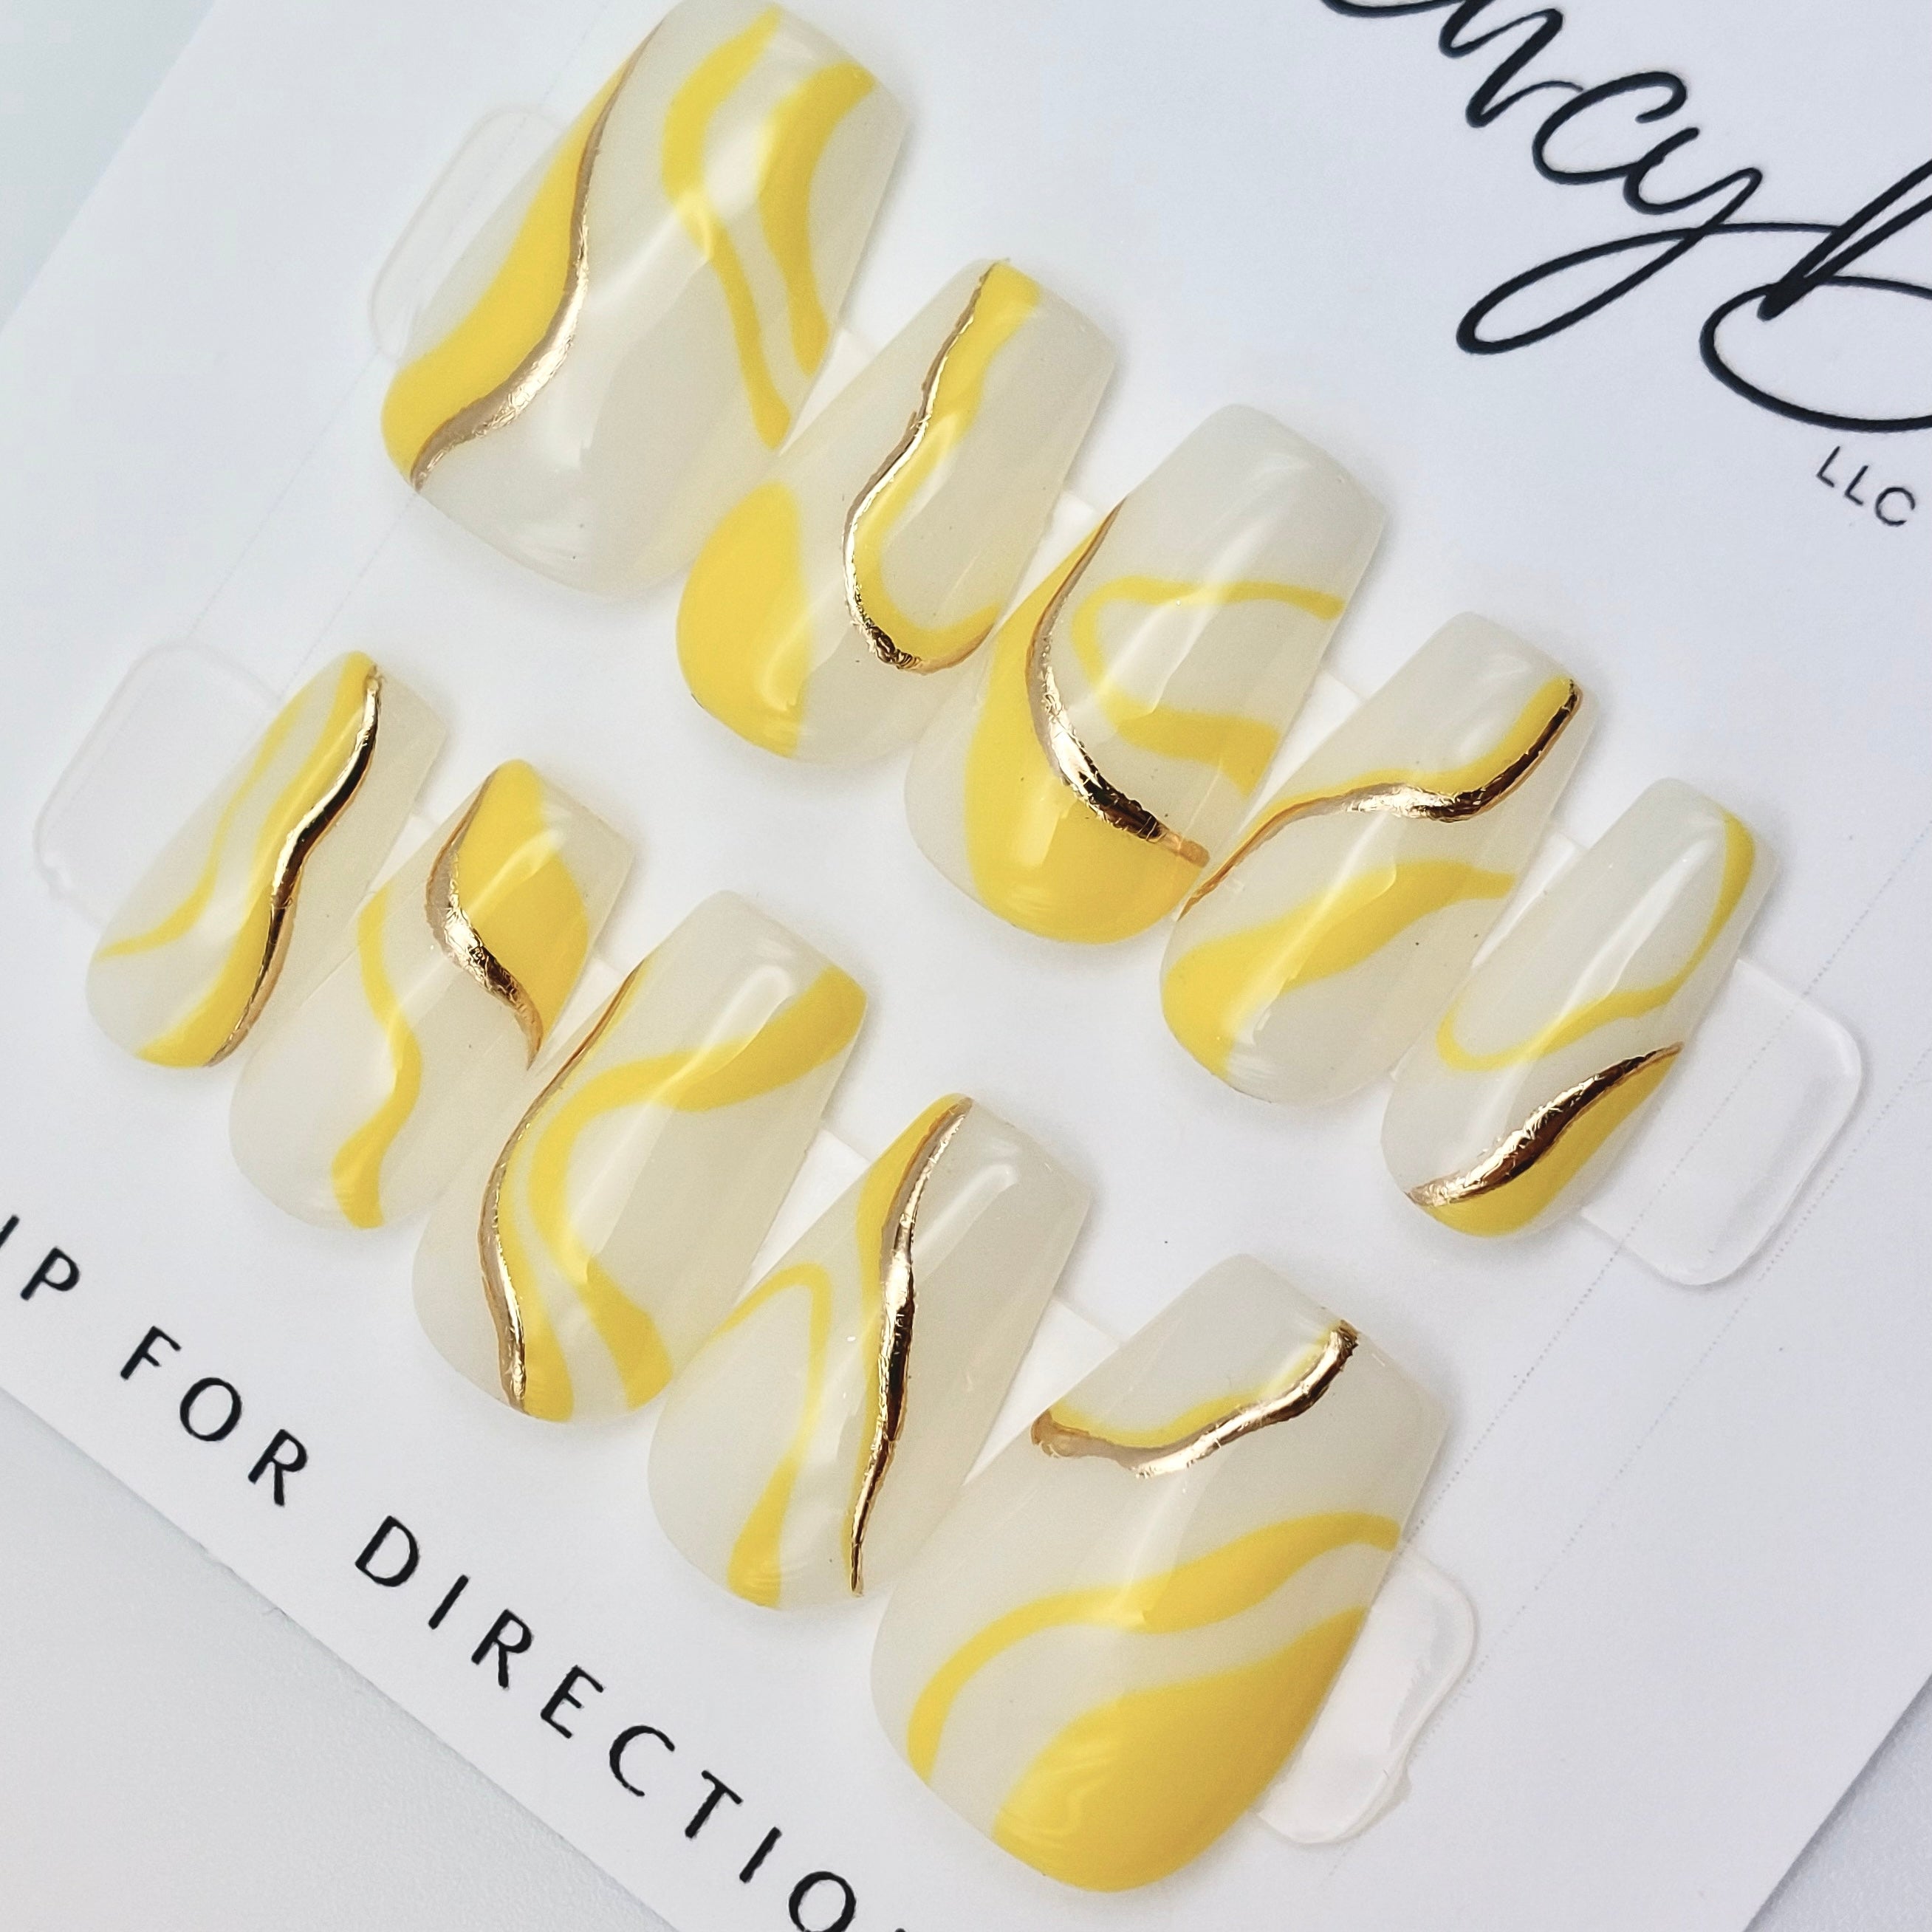 fancyb custom press on nails milky white with yellow and gold chrome swirls on short coffin nail shape.